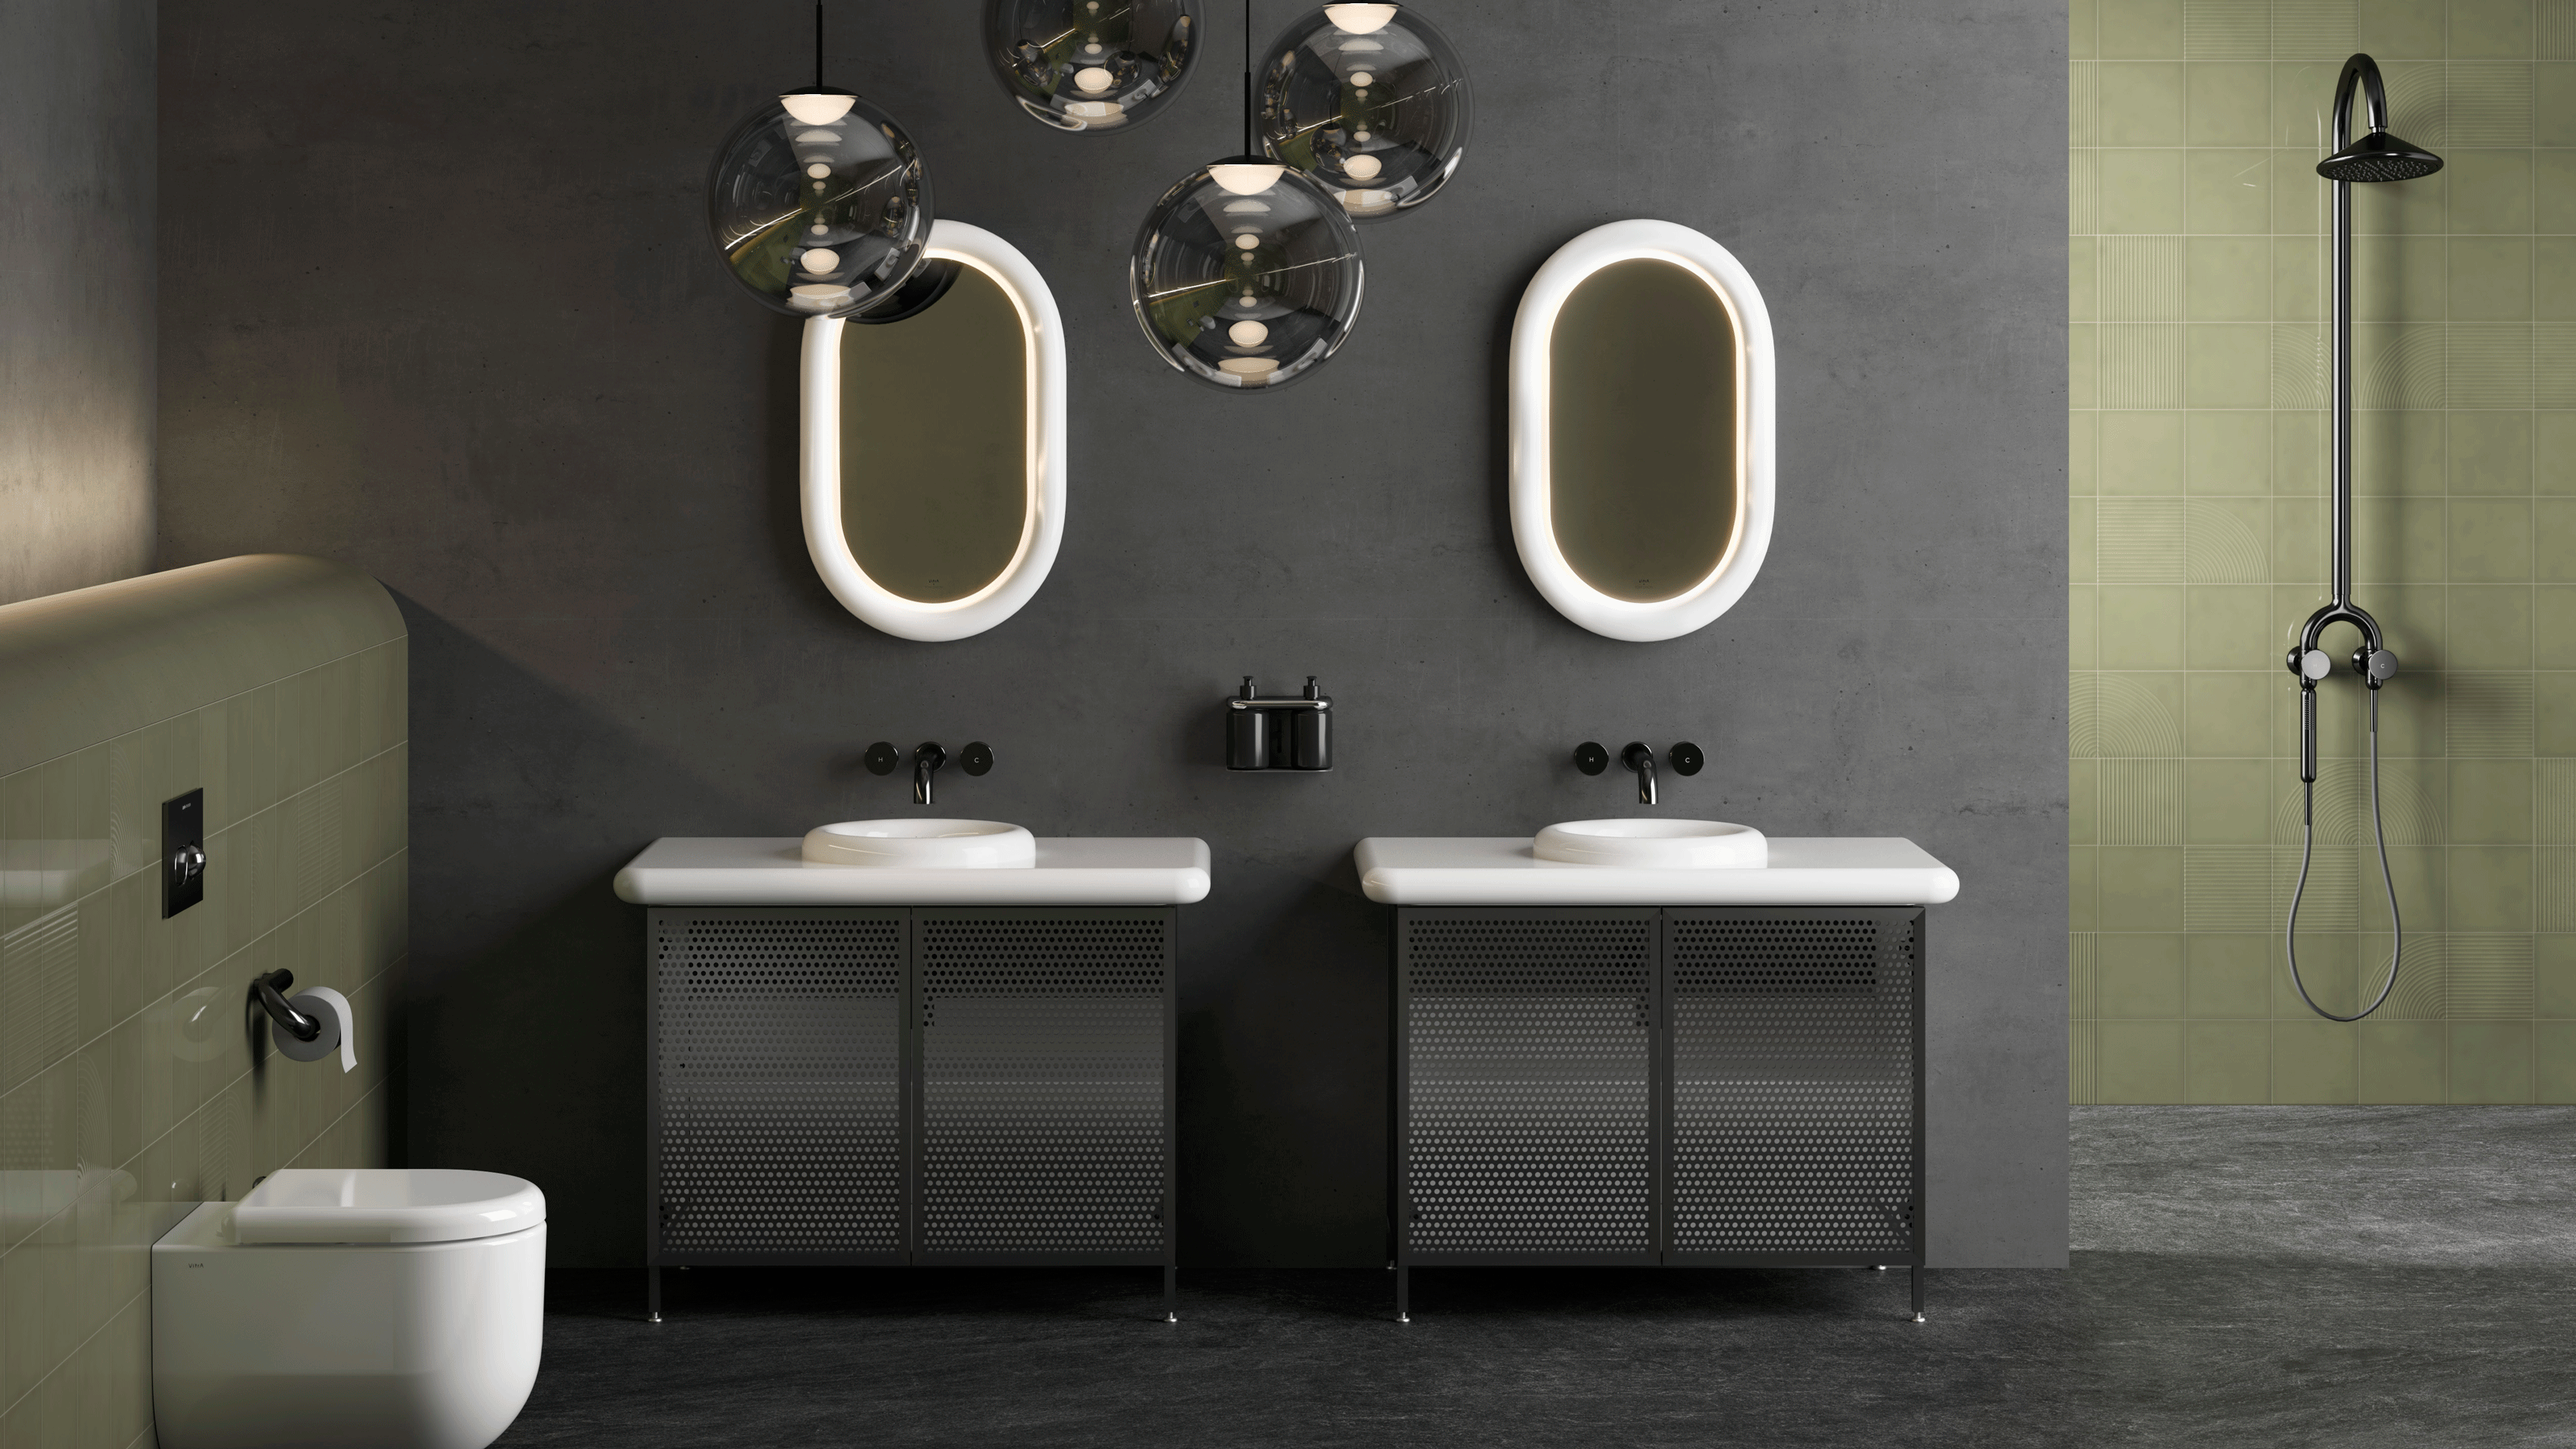 Double bathroom vanity sinks with oval mirrors